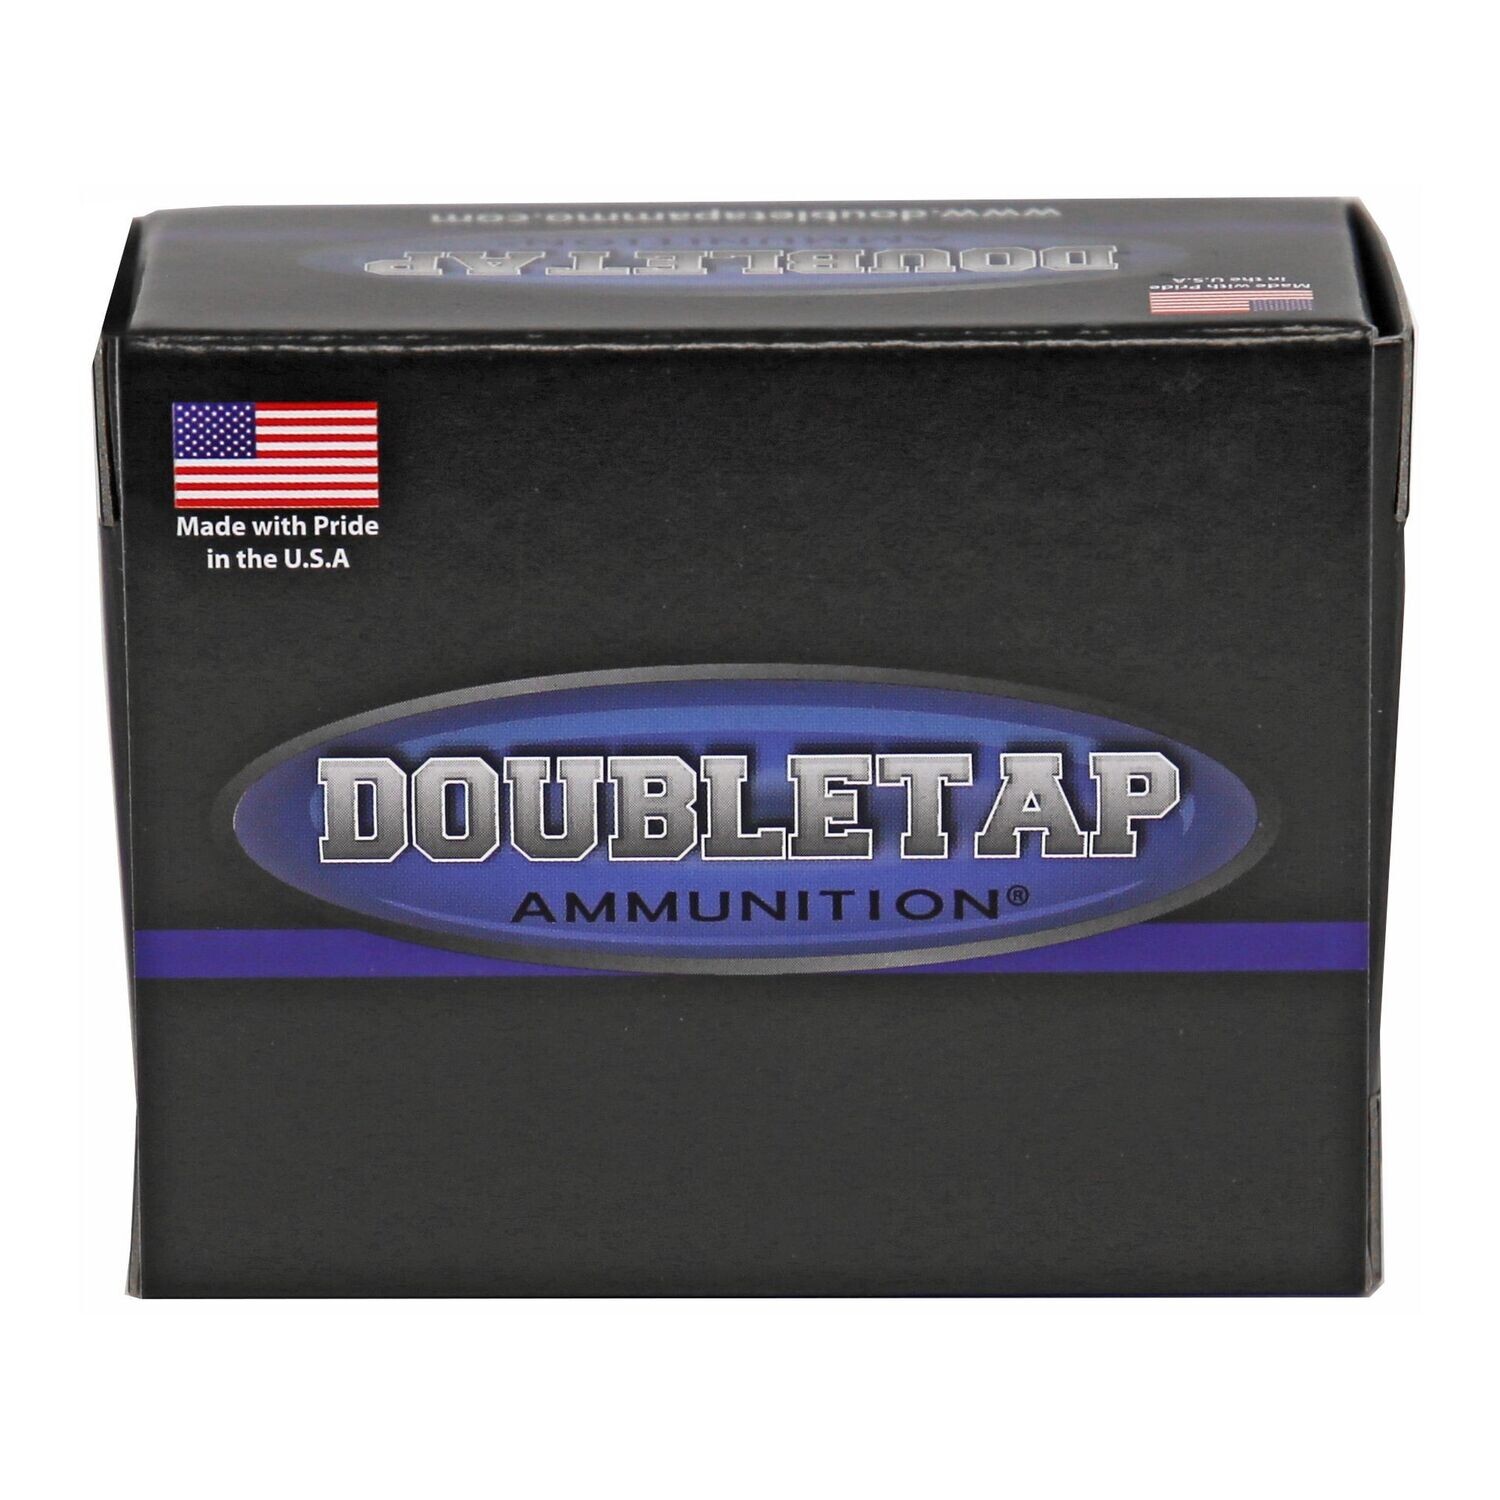 DoubleTap Ammunition, Lead Free, 10MM, 125Gr, Solid Copper Hollow Point, 20 Round Box, California Certified Nonlead Ammunition